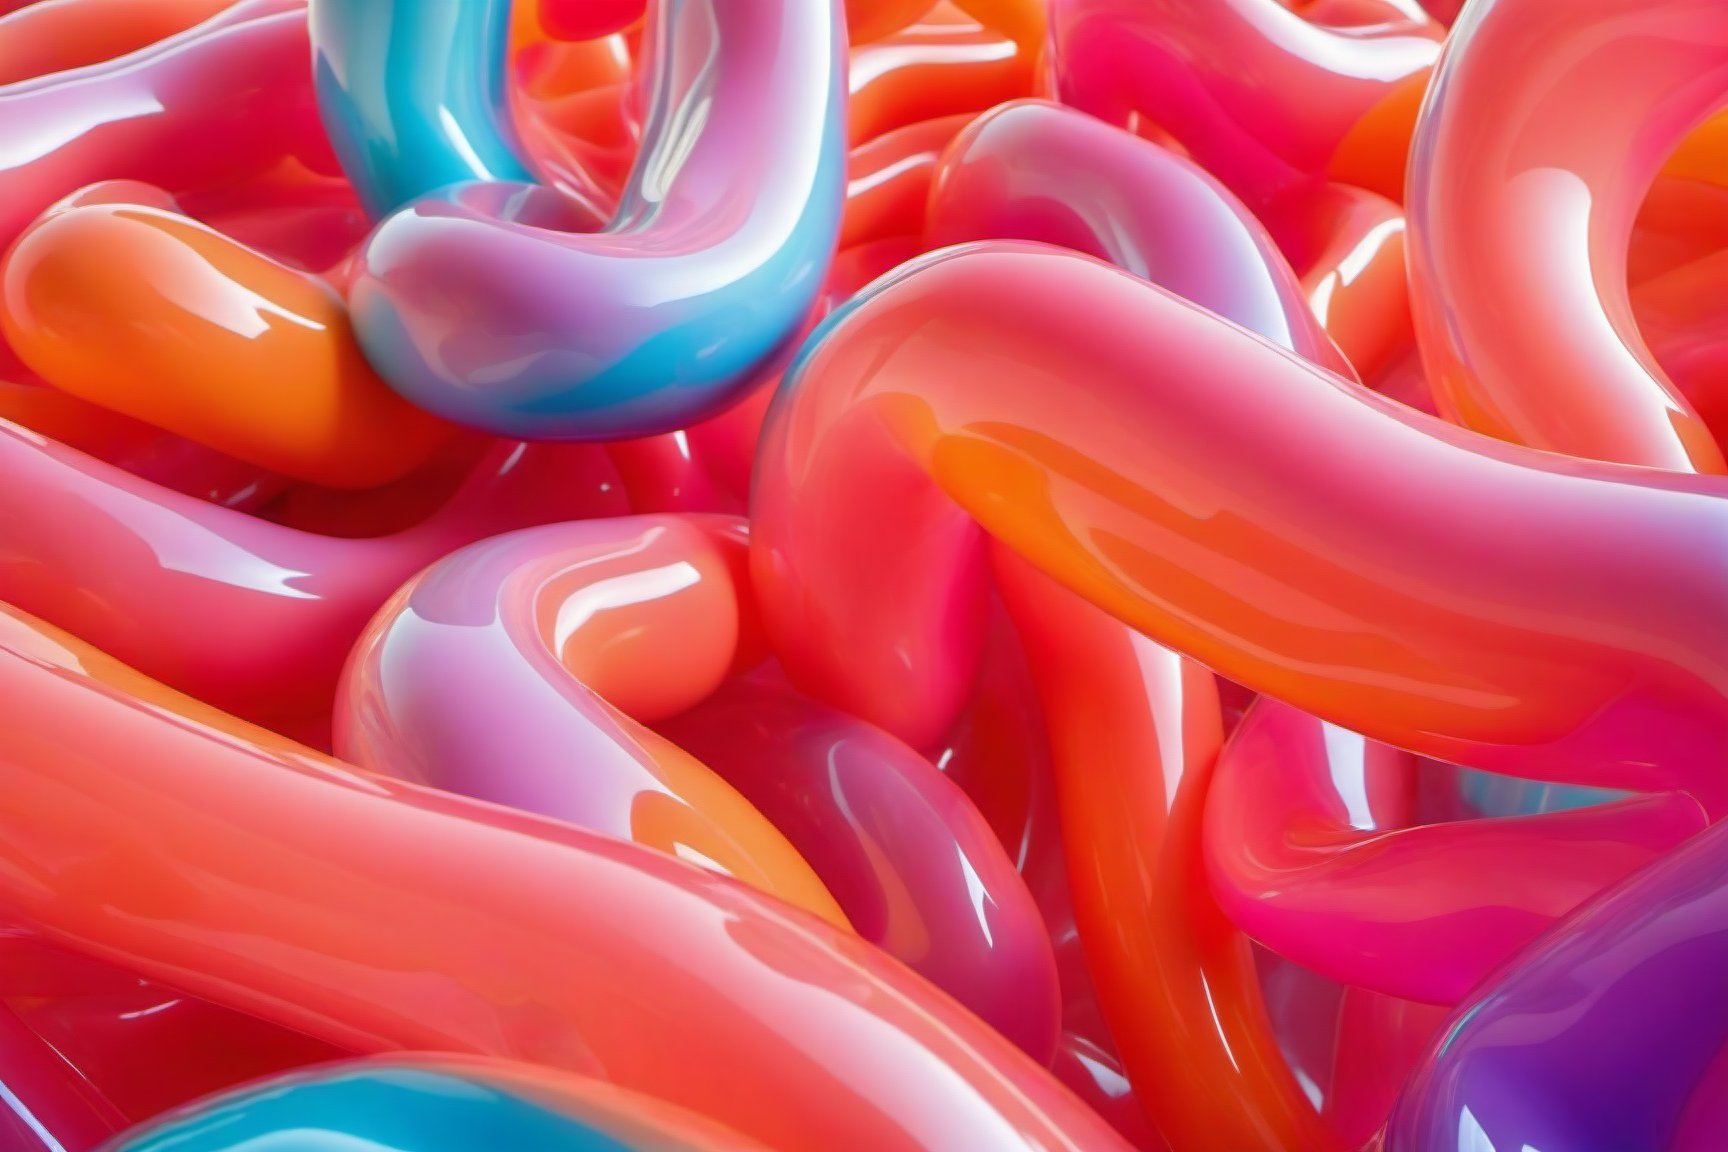 abstract, (latex:2), (pvc), goemetric flow, ,6000, ink scenery, (transparent), translucent, curvy shapes, kinky abstract,  pastel, vibrant